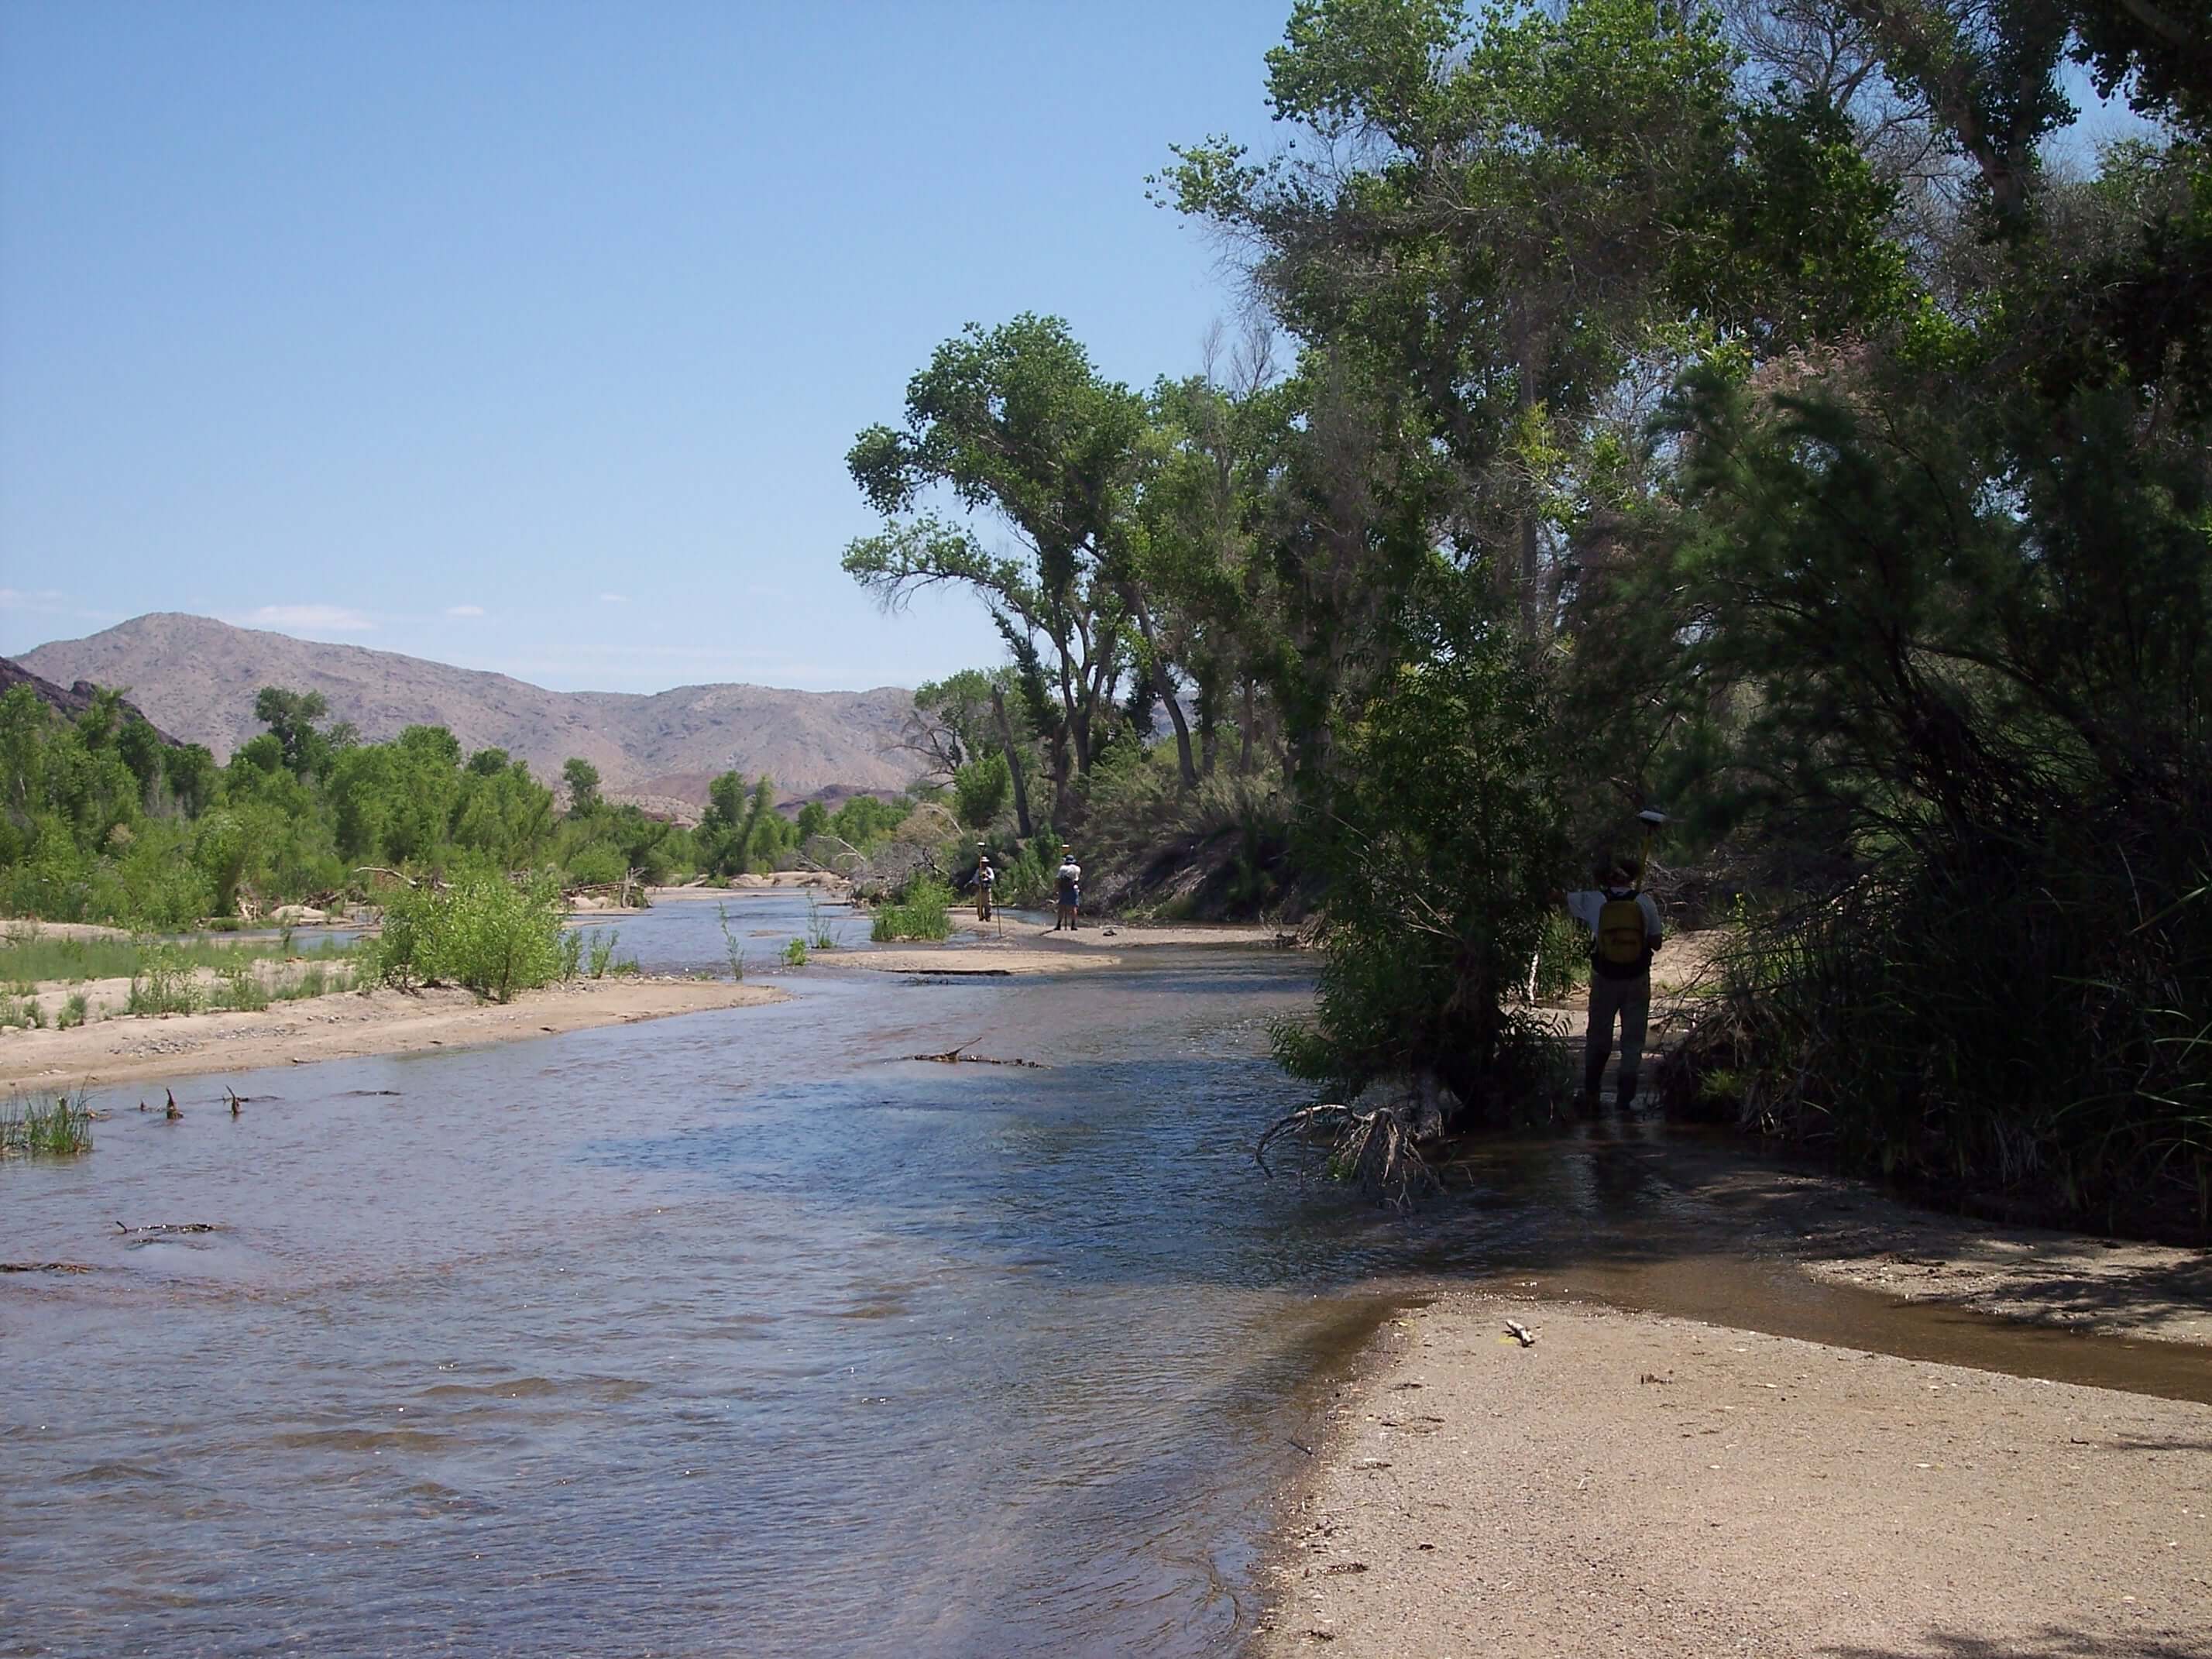 Scientists, engineers, and other professionals from a variety of organizations have nurtured the investigation of ecological dynamics related to flow management for the Bill Williams River. The rich scientific understanding produced by these efforts helps inform operations of Alamo Dam.